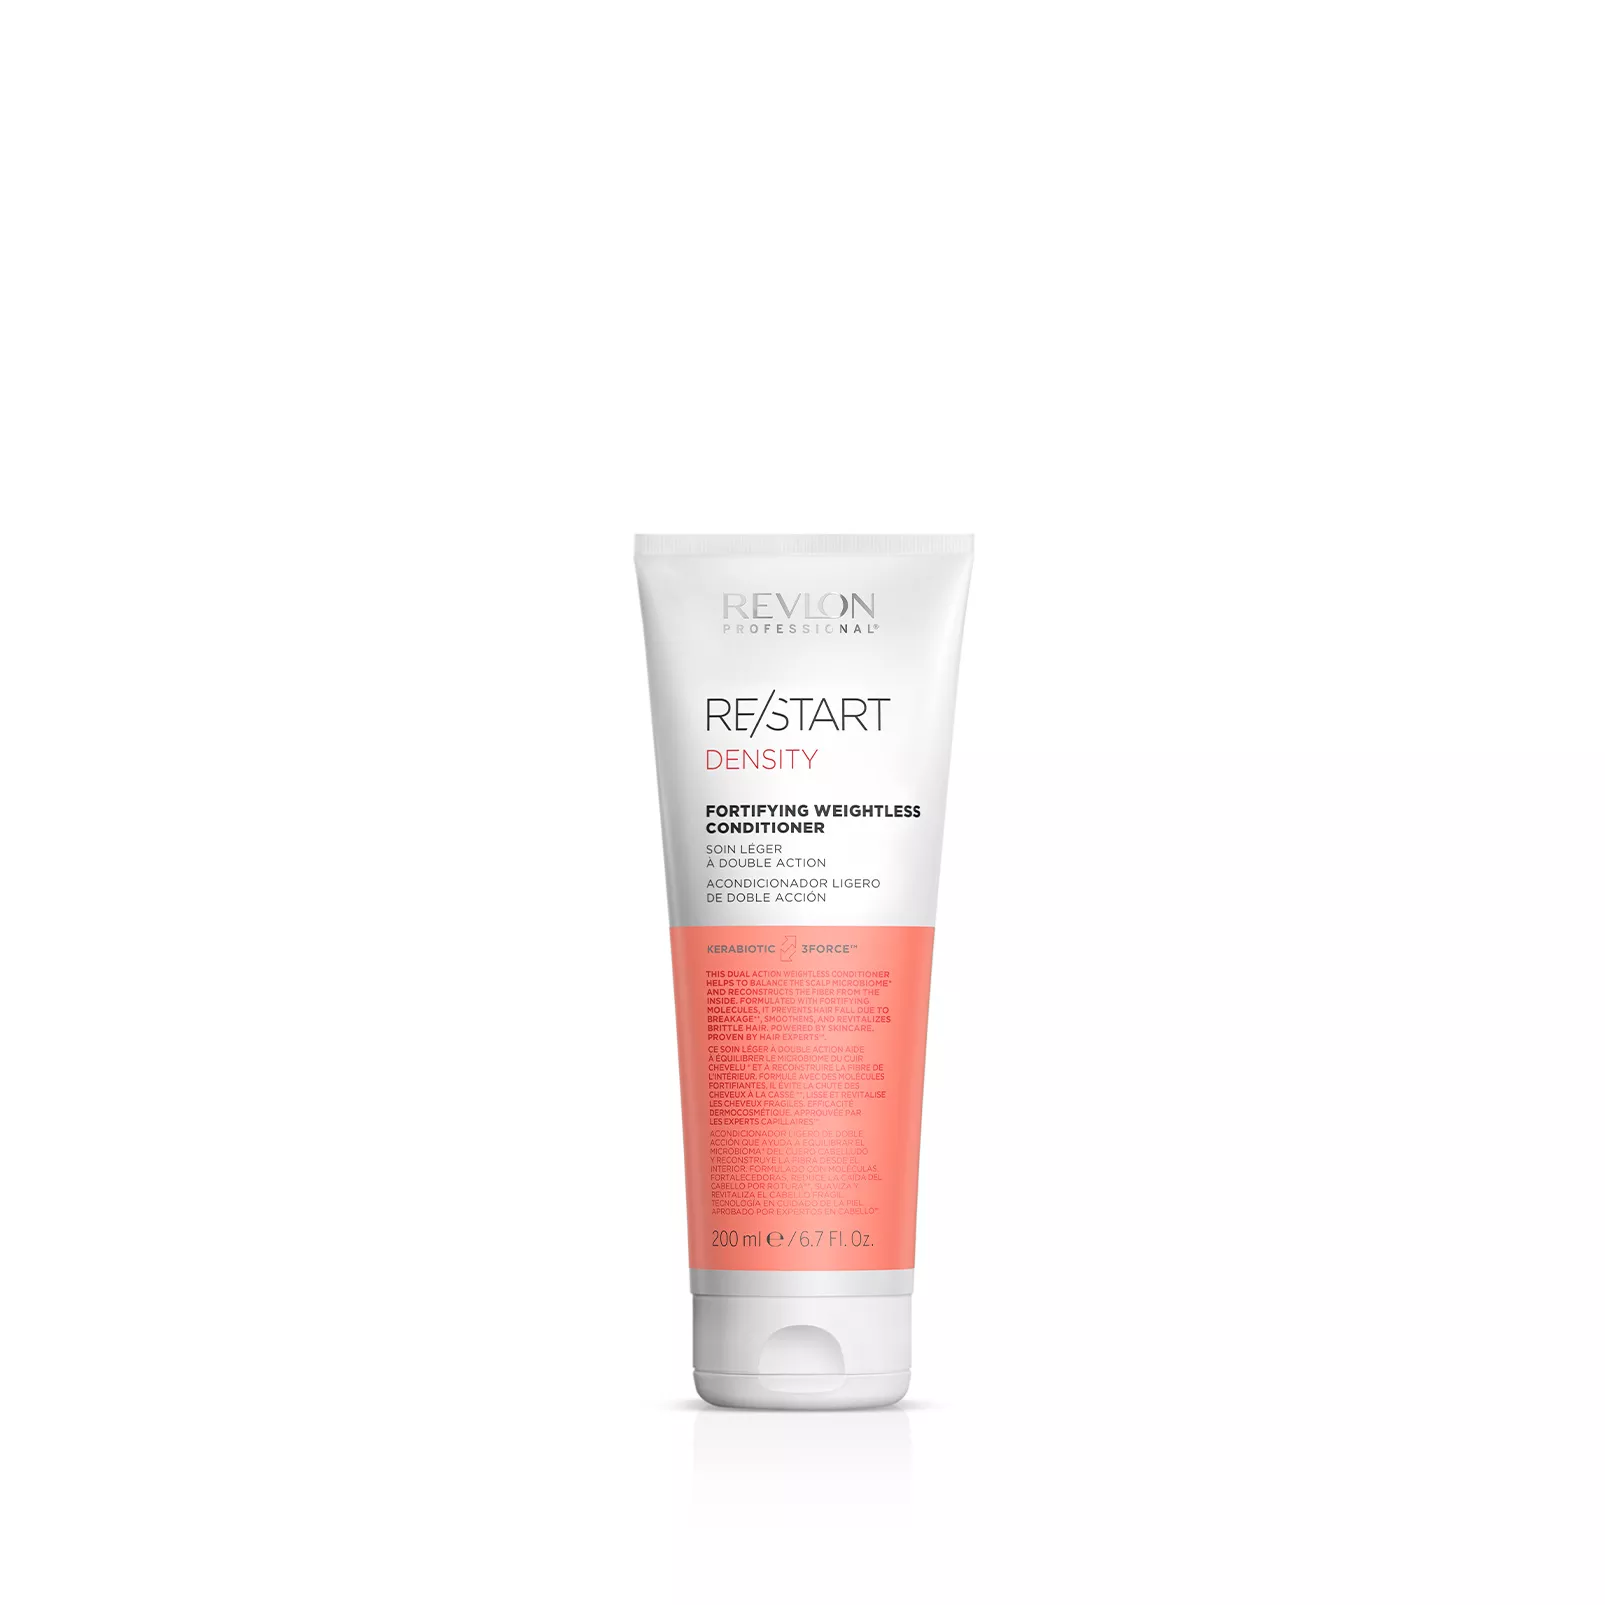 RE/START™ Density Fortifying Weightless - Professional Conditioner Revlon